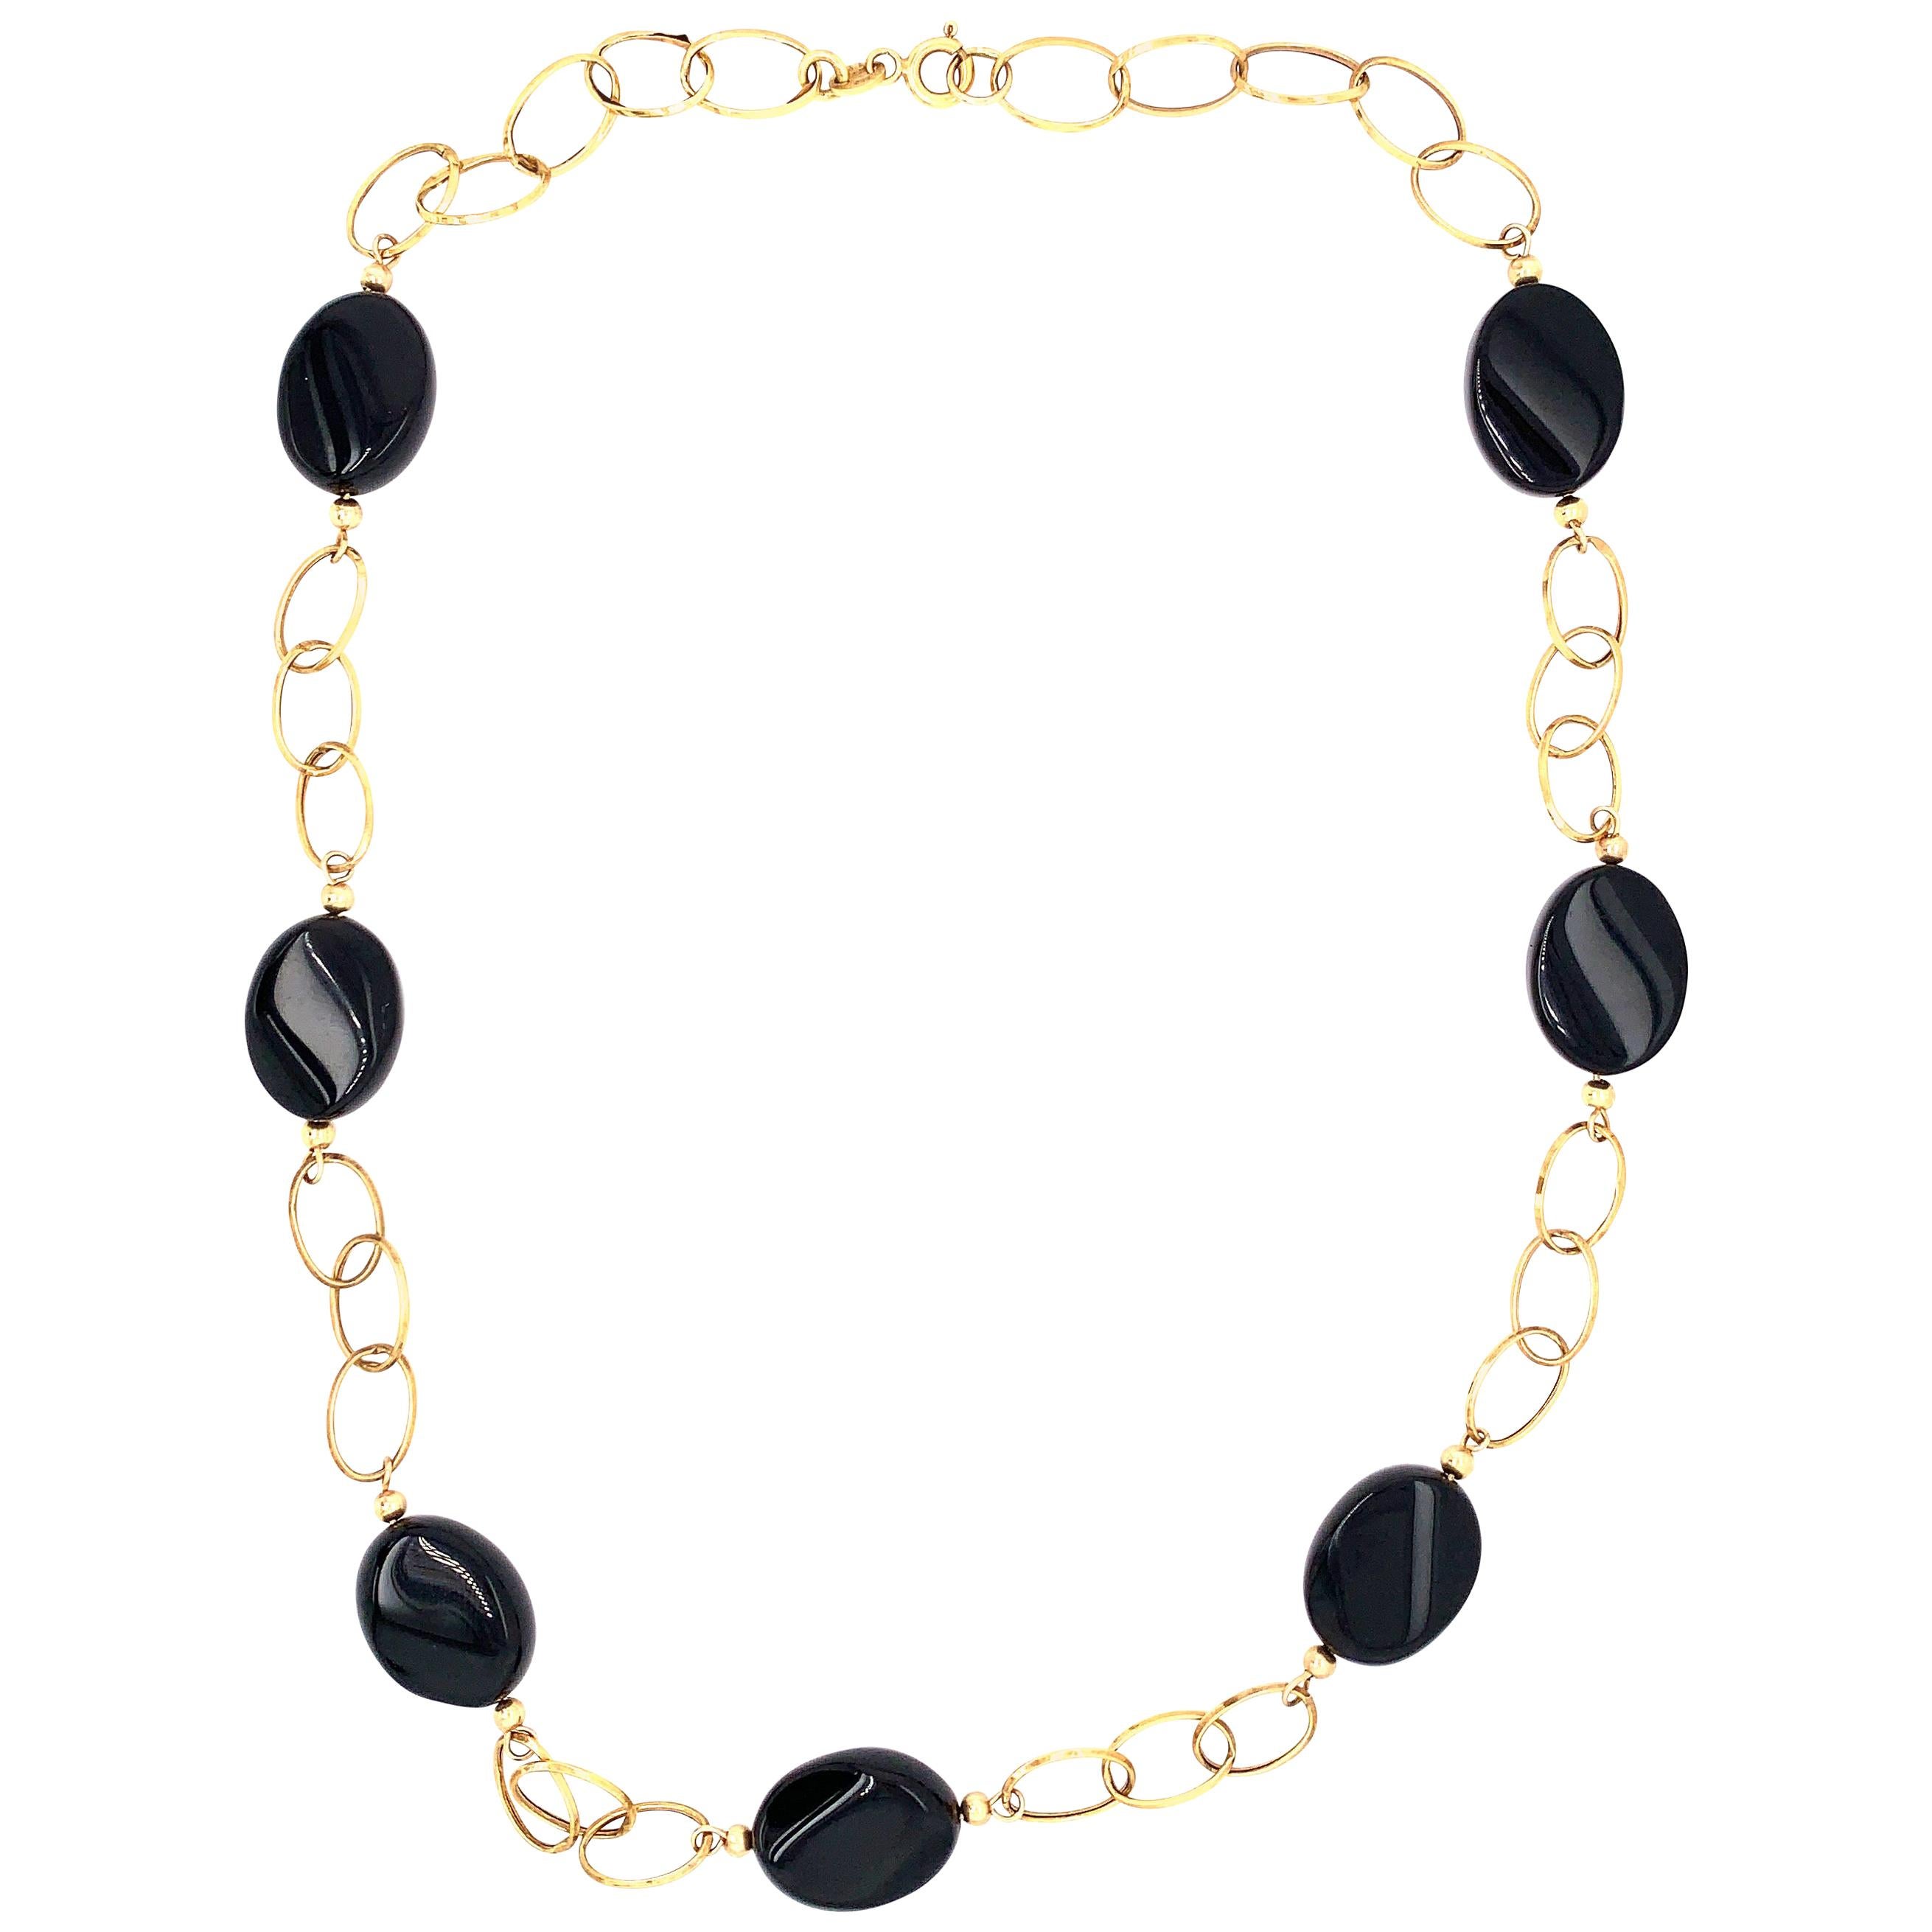 14 Karat Yellow Gold Link Necklace with Ebony Stones 21.2 Grams Total